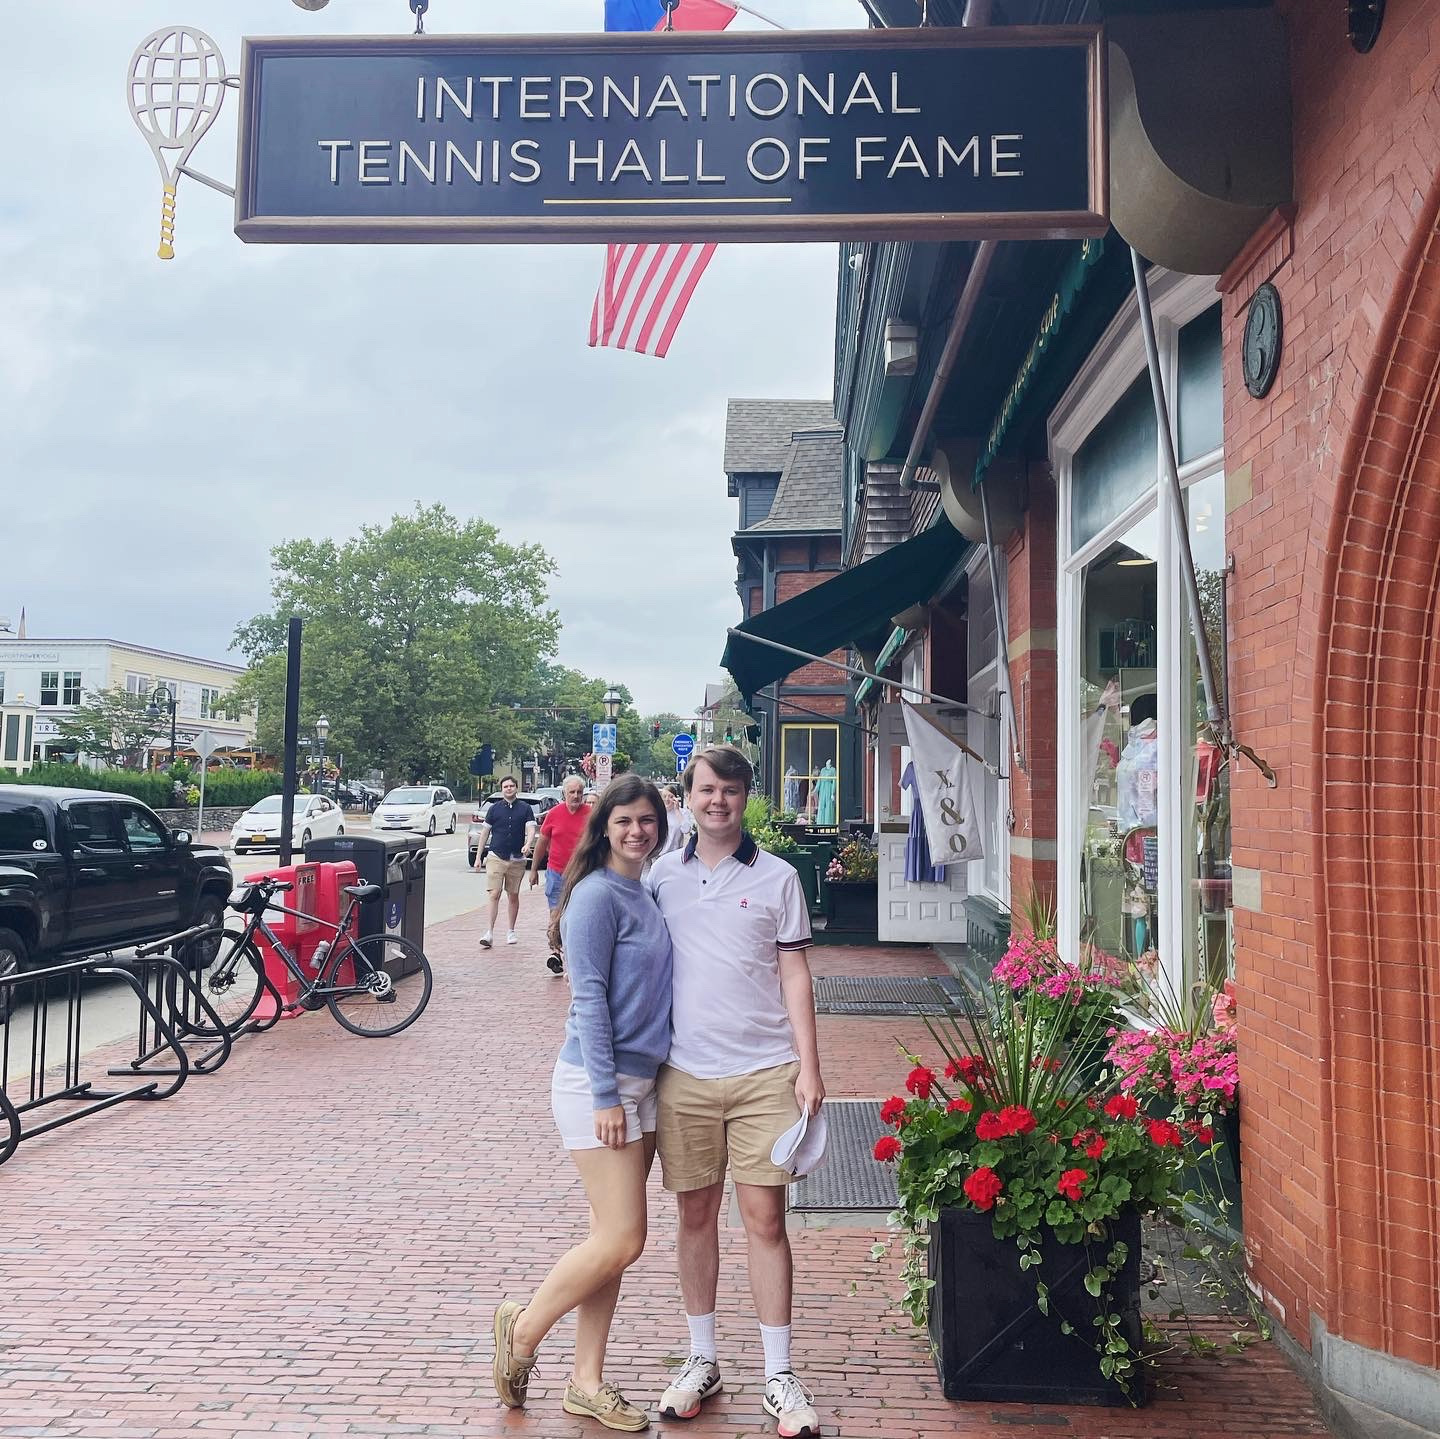 Visiting the International Tennis Hall of Fame